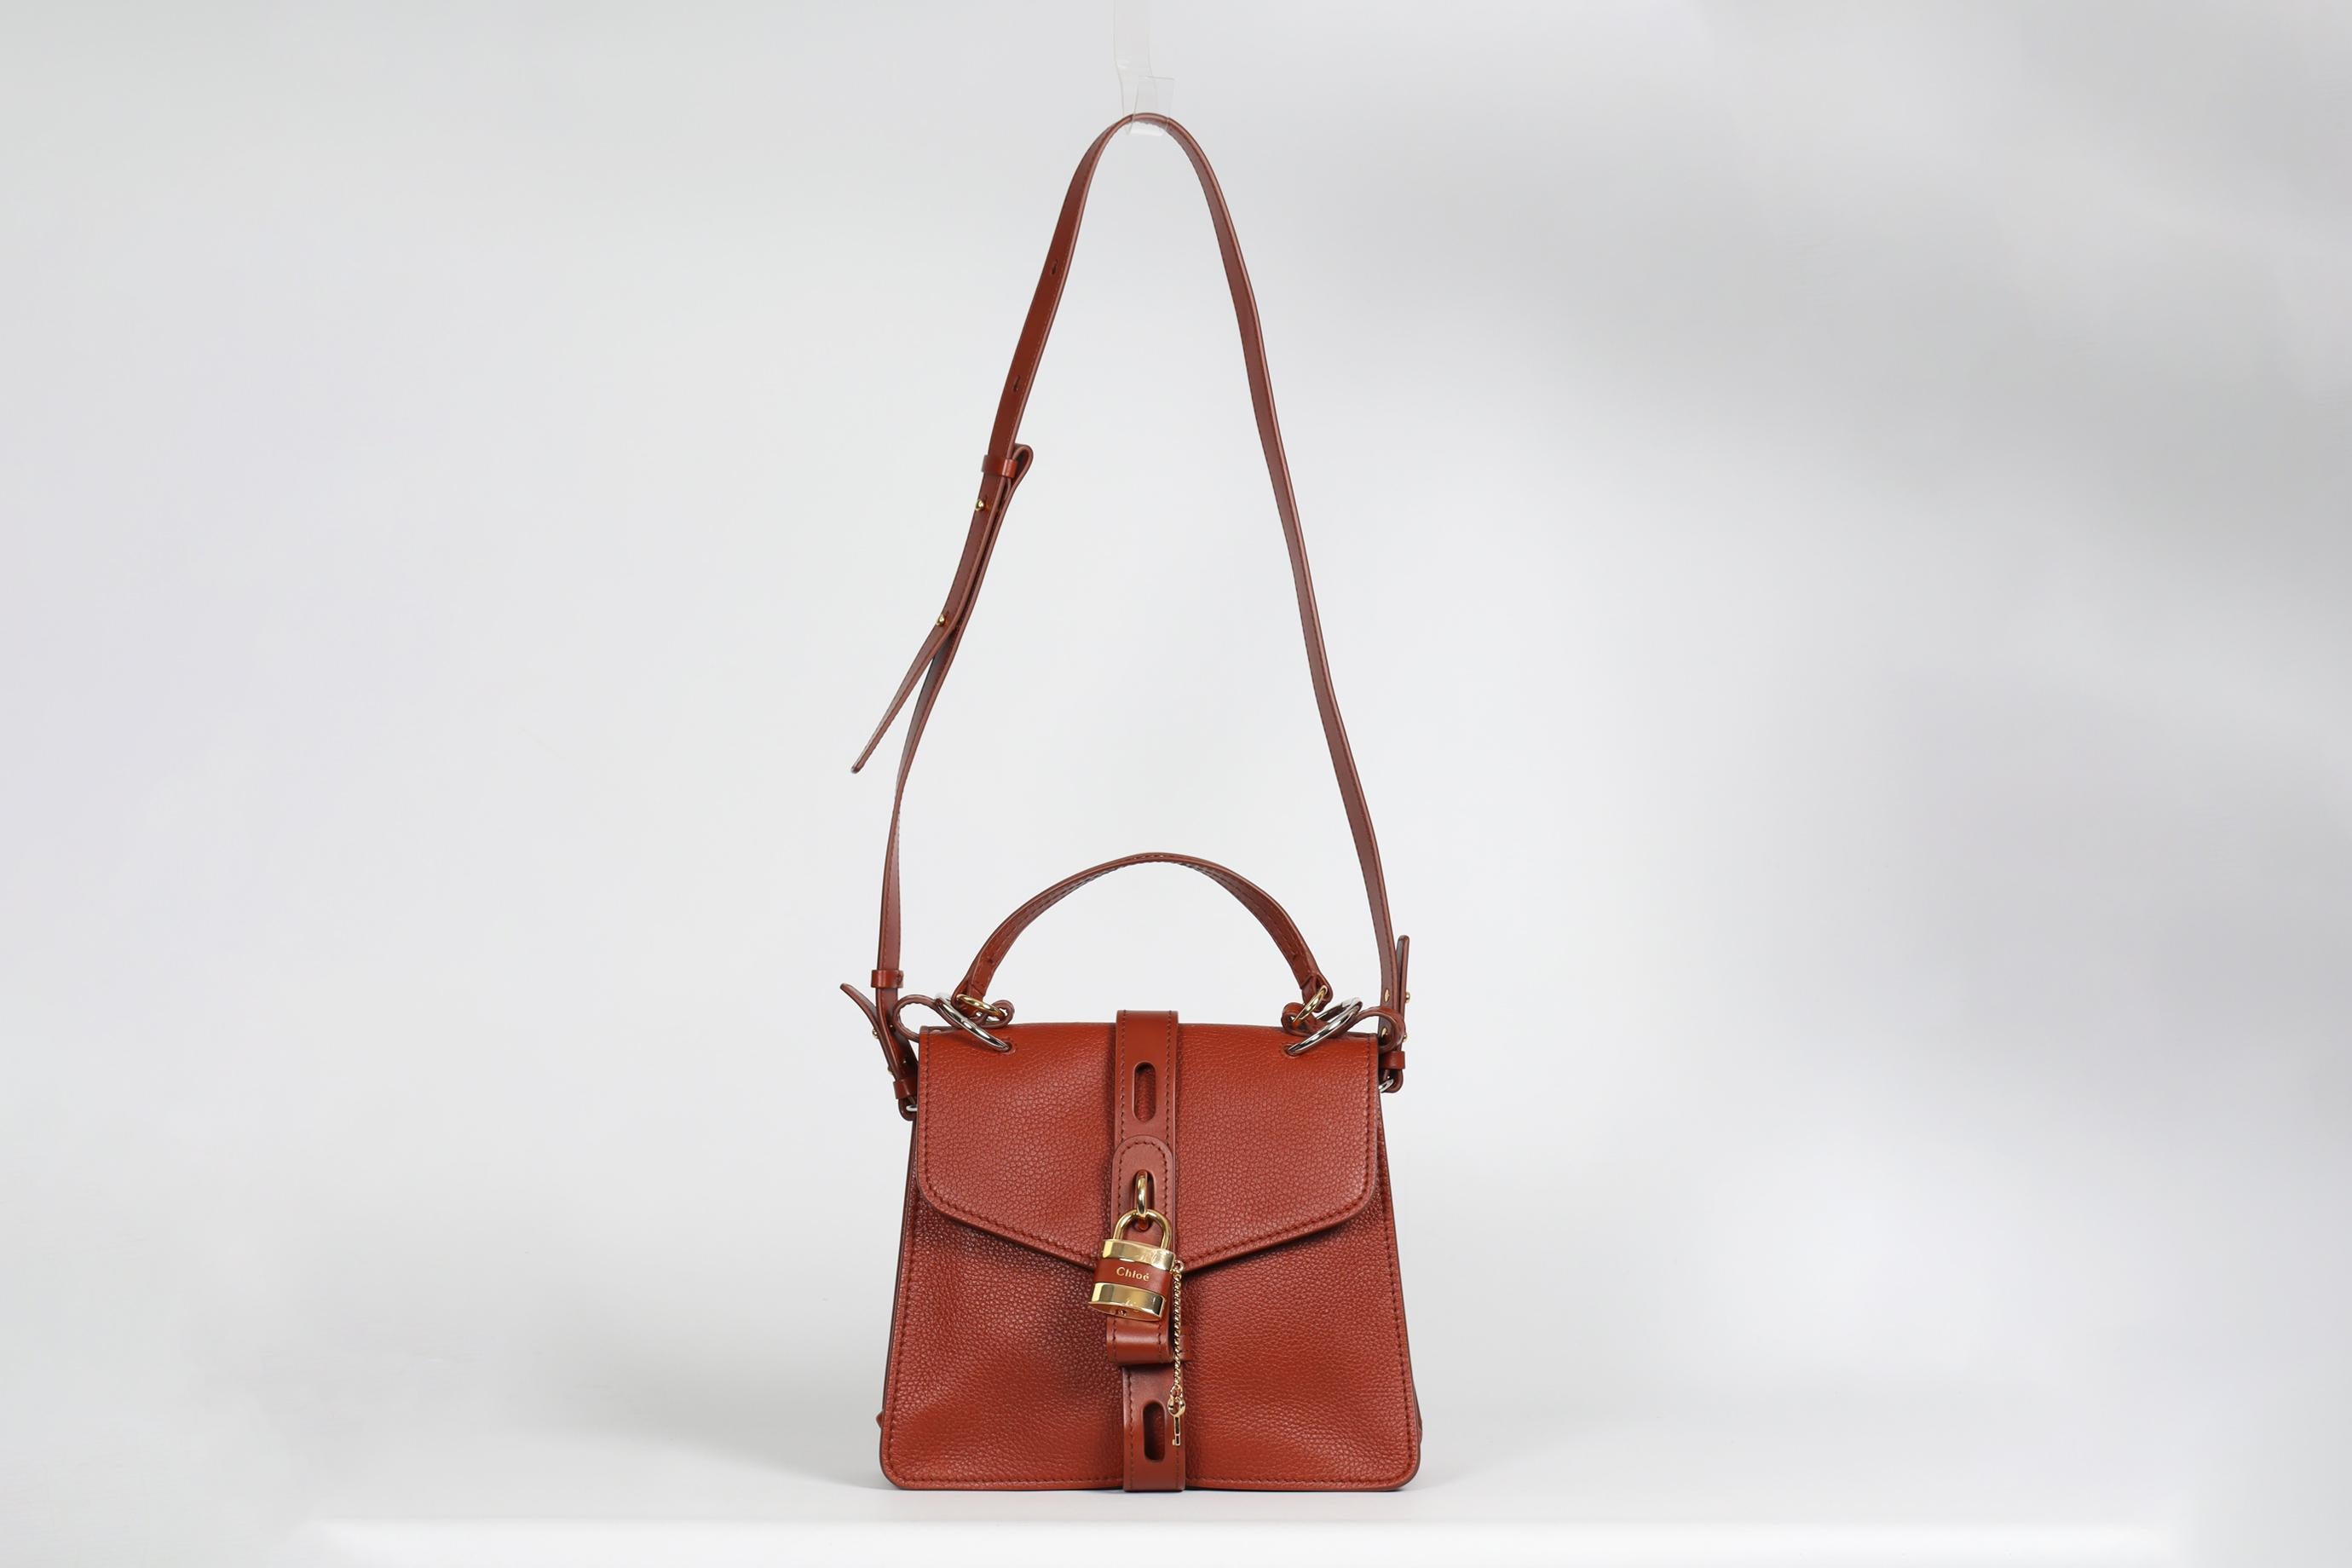 Chloé Aby Leather Shoulder Bag In Excellent Condition For Sale In London, GB